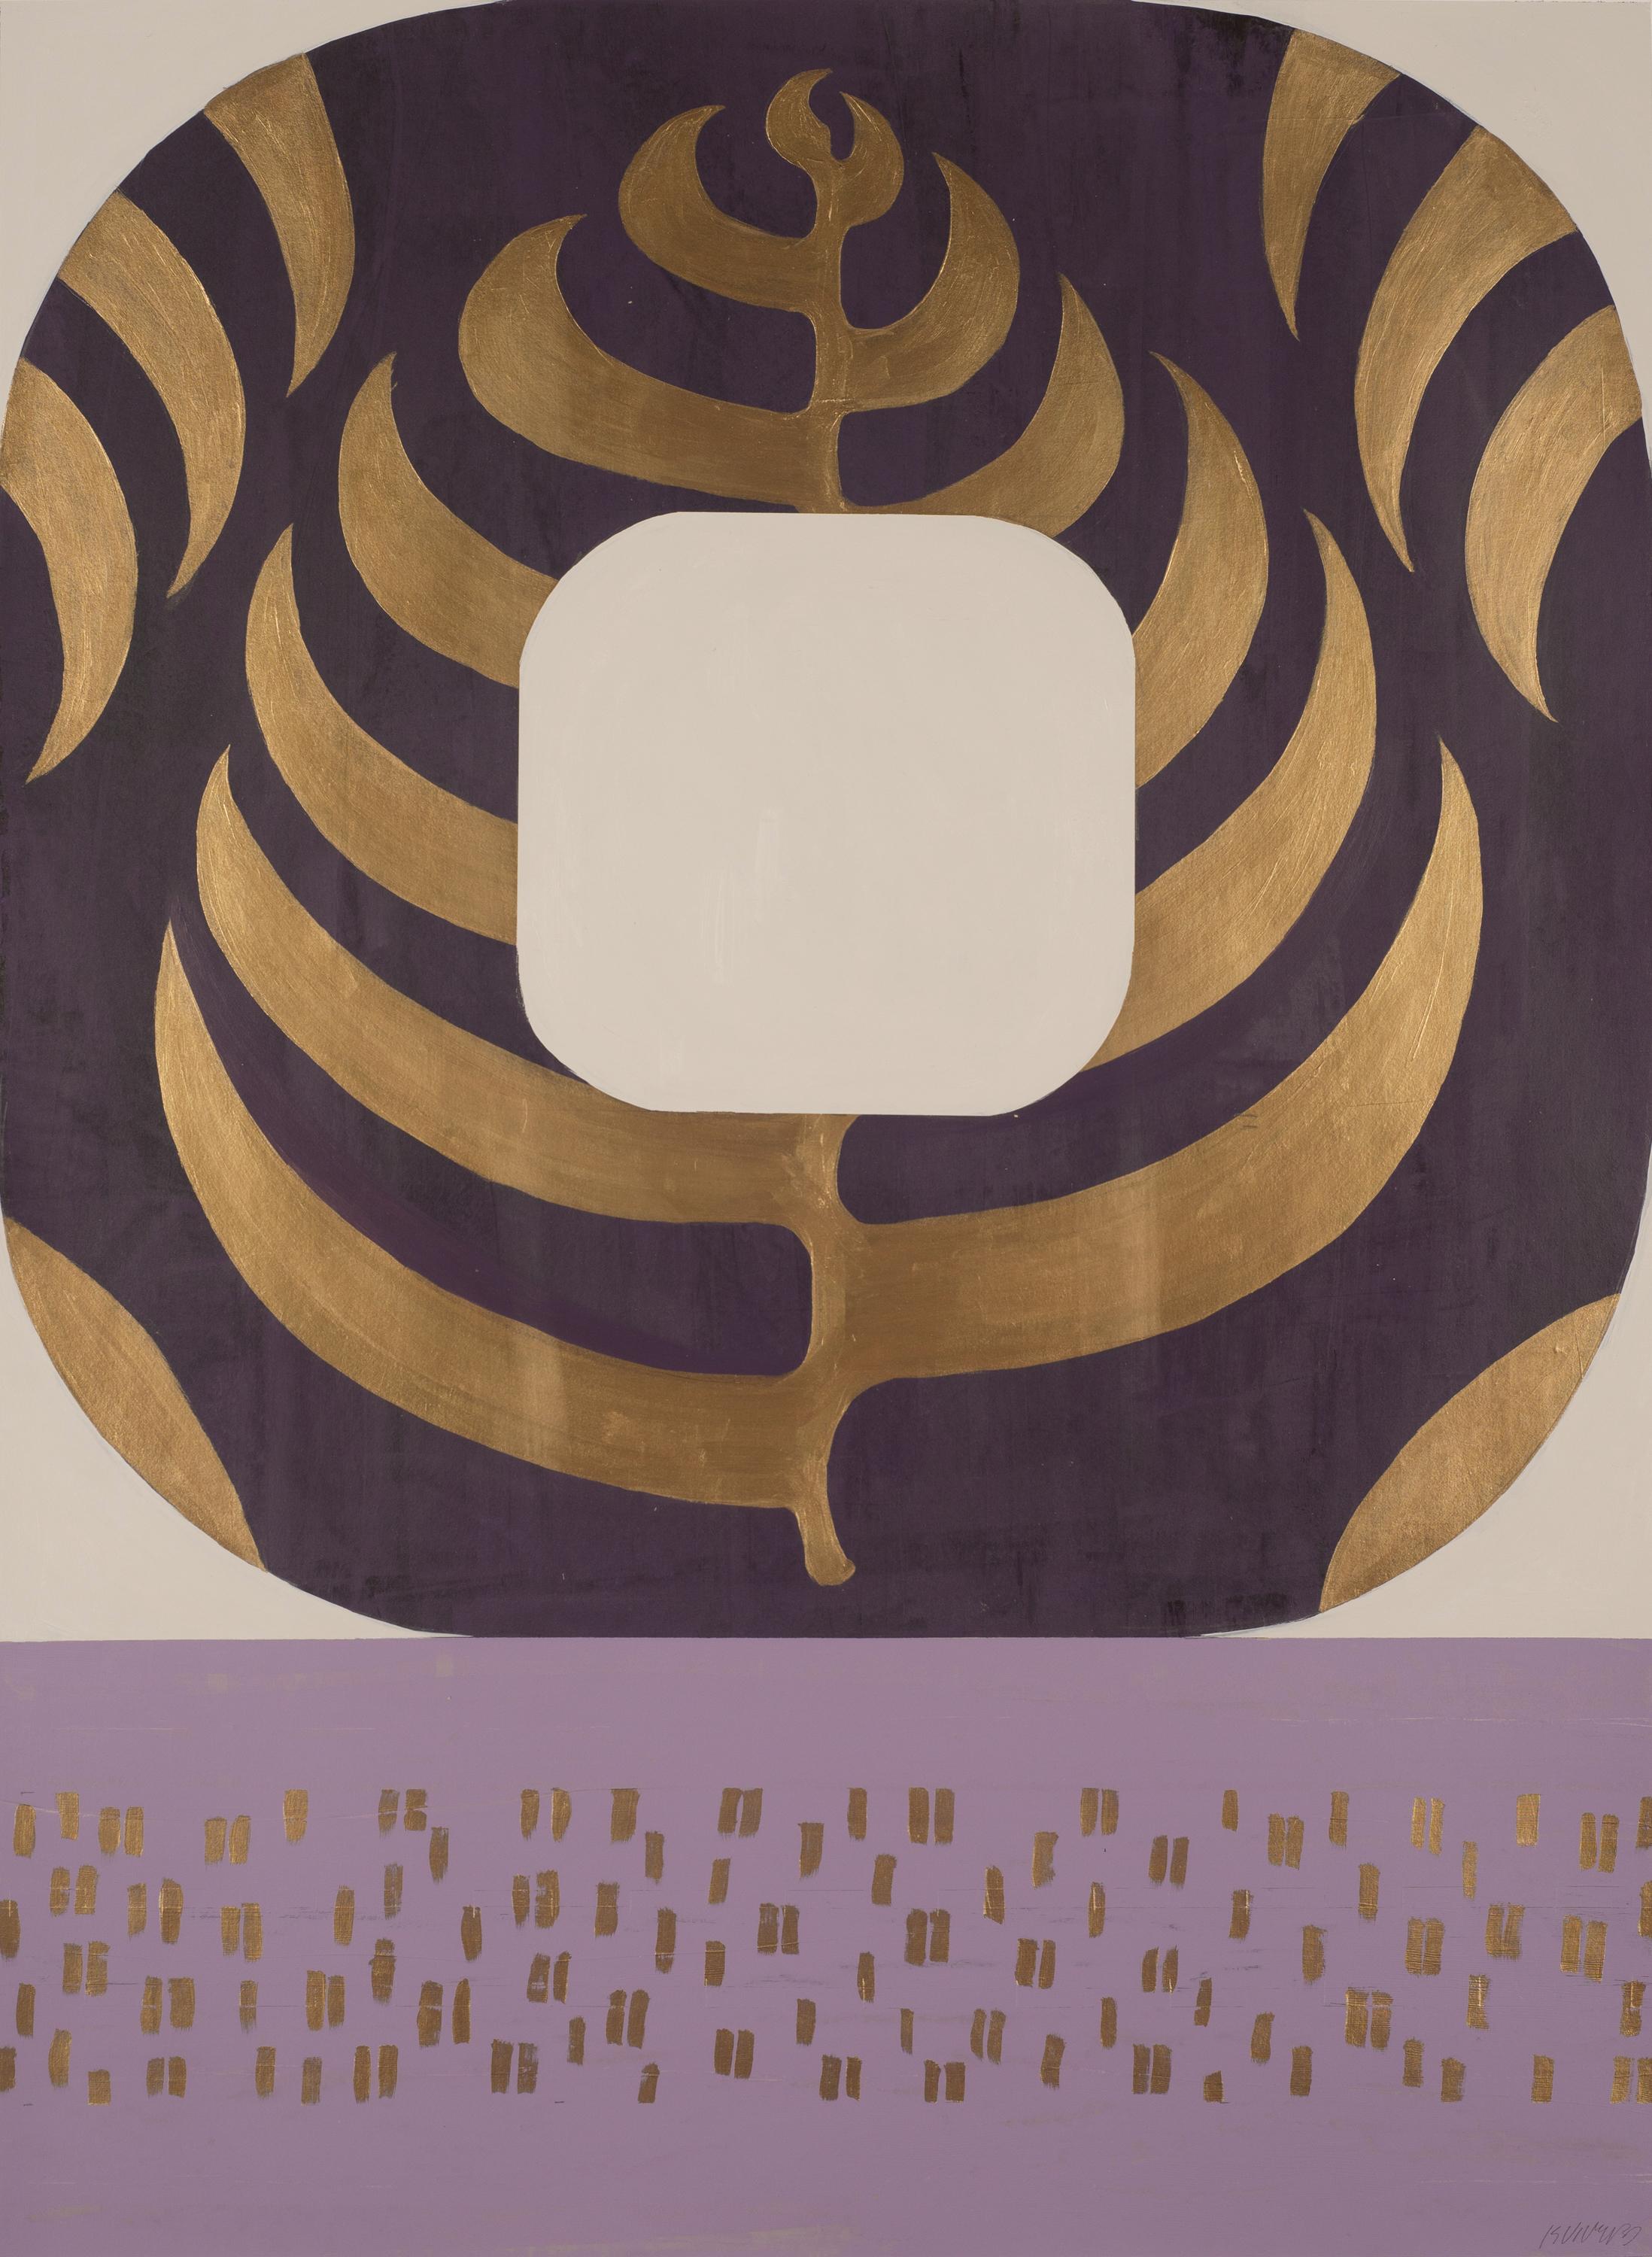 Kazaan Viveiros Abstract Drawing - Alternating Aubergine, purple and gold geometric abstract painting on paper